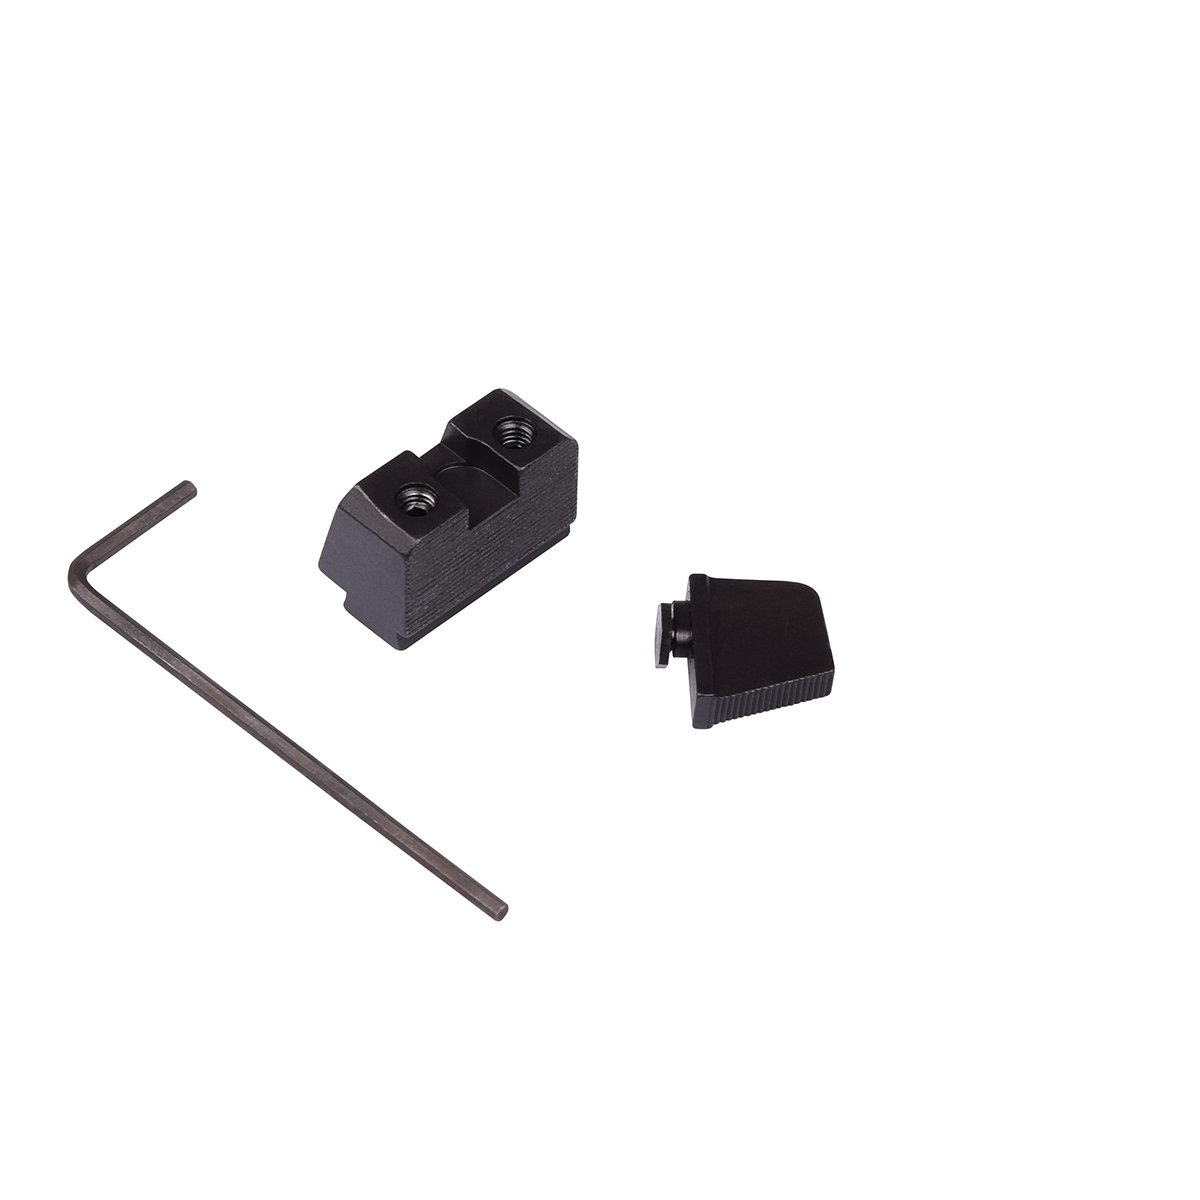 Walther PDP Suppressor Height Sight. Fixed, black, serrated